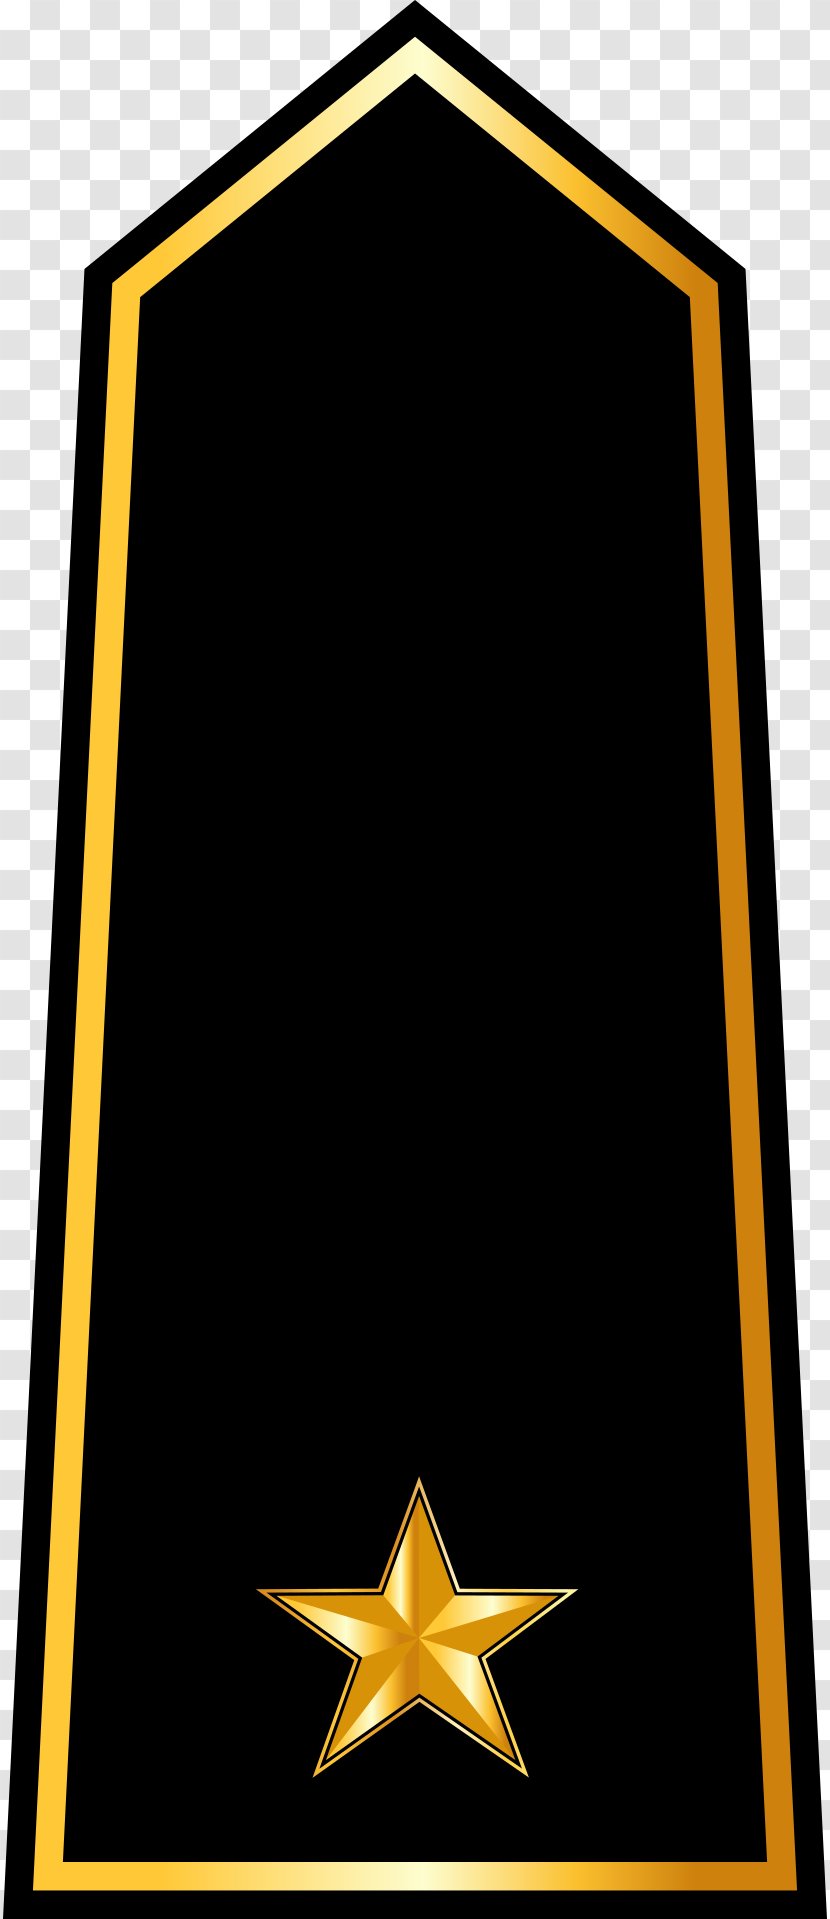 Tunisian Armed Forces Military Rank Lieutenant - Ranks Of Tunisia Transparent PNG